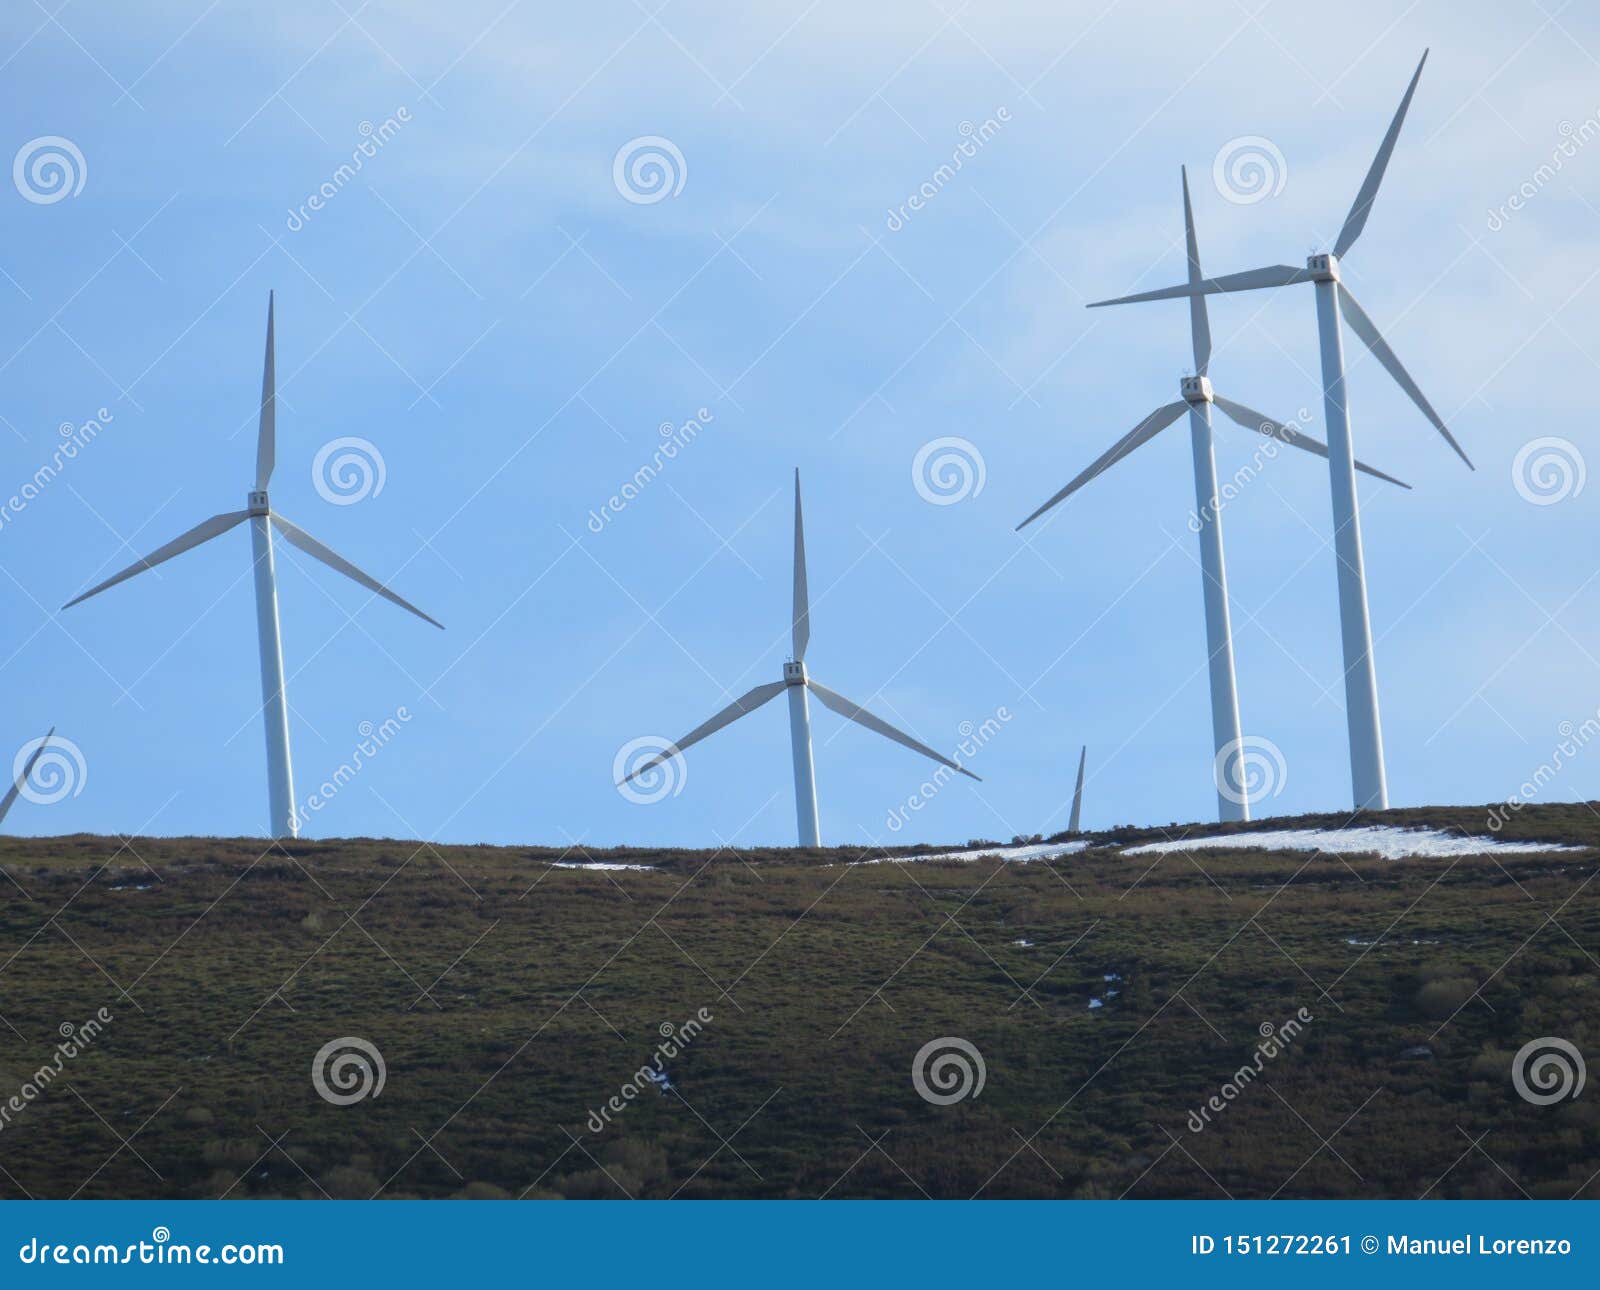 windmills to generate electricity and improve our lives